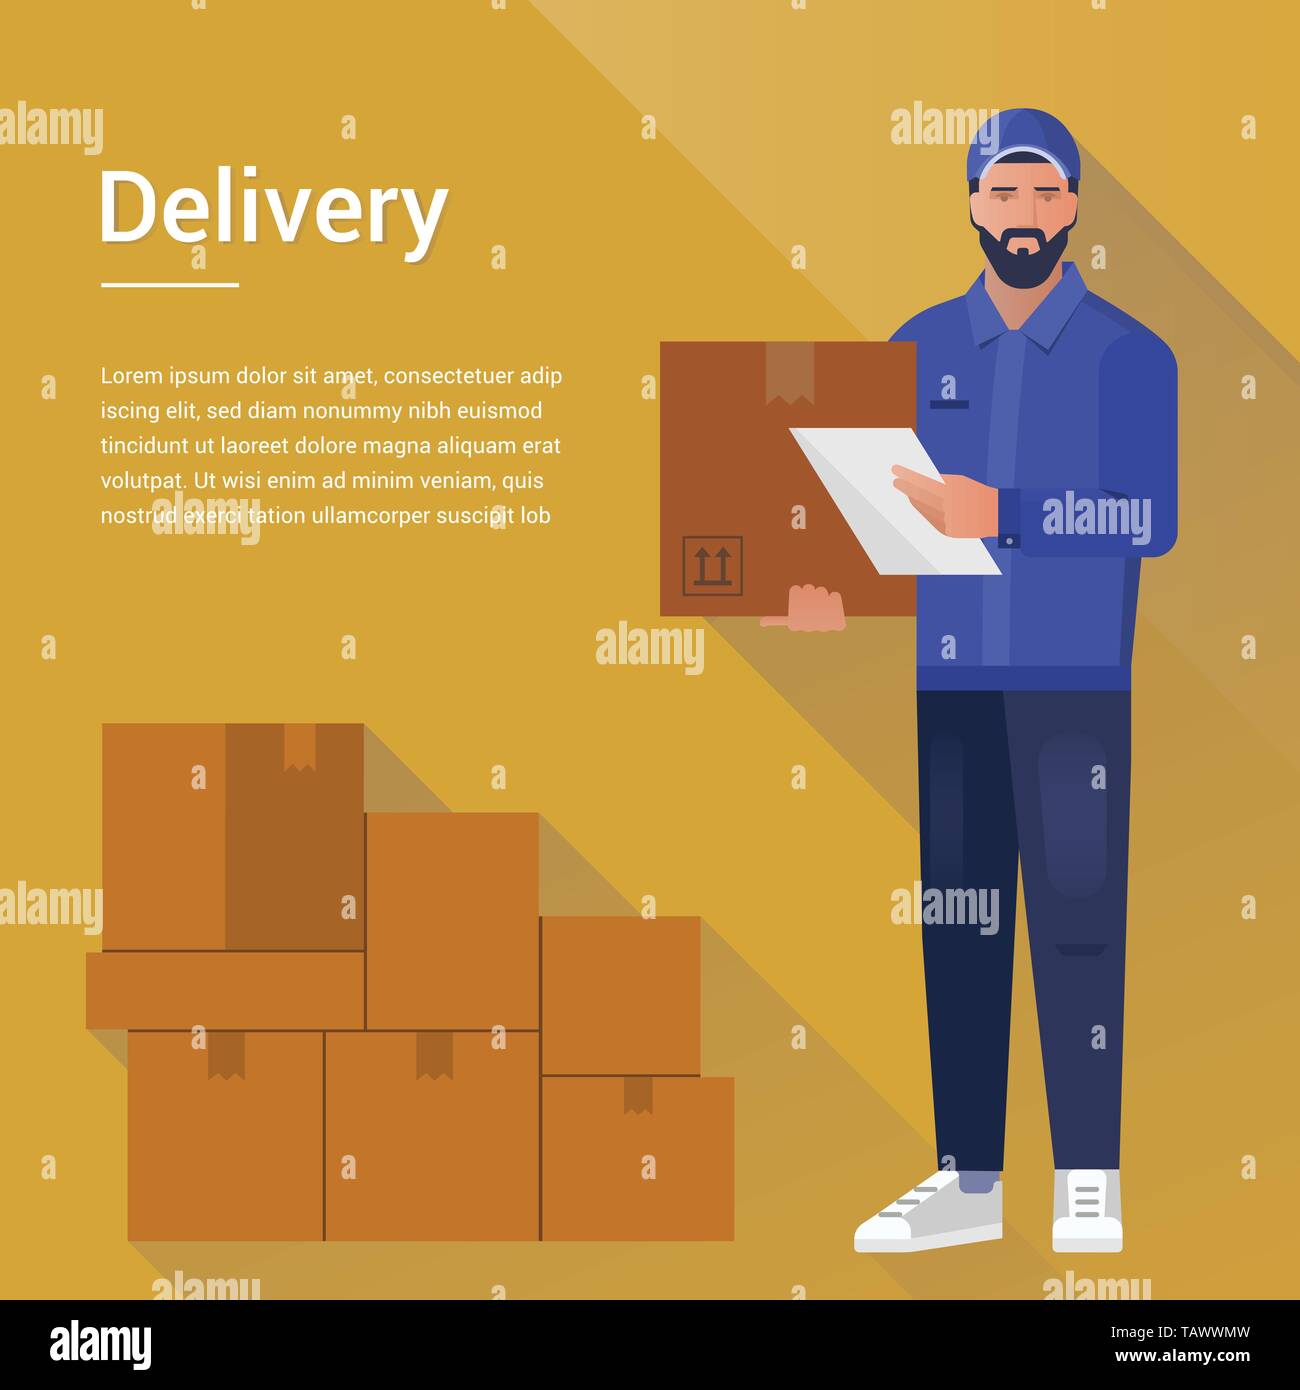 Vector design concept with illustration of a bearded courier man from a cargo delivery service Stock Vector